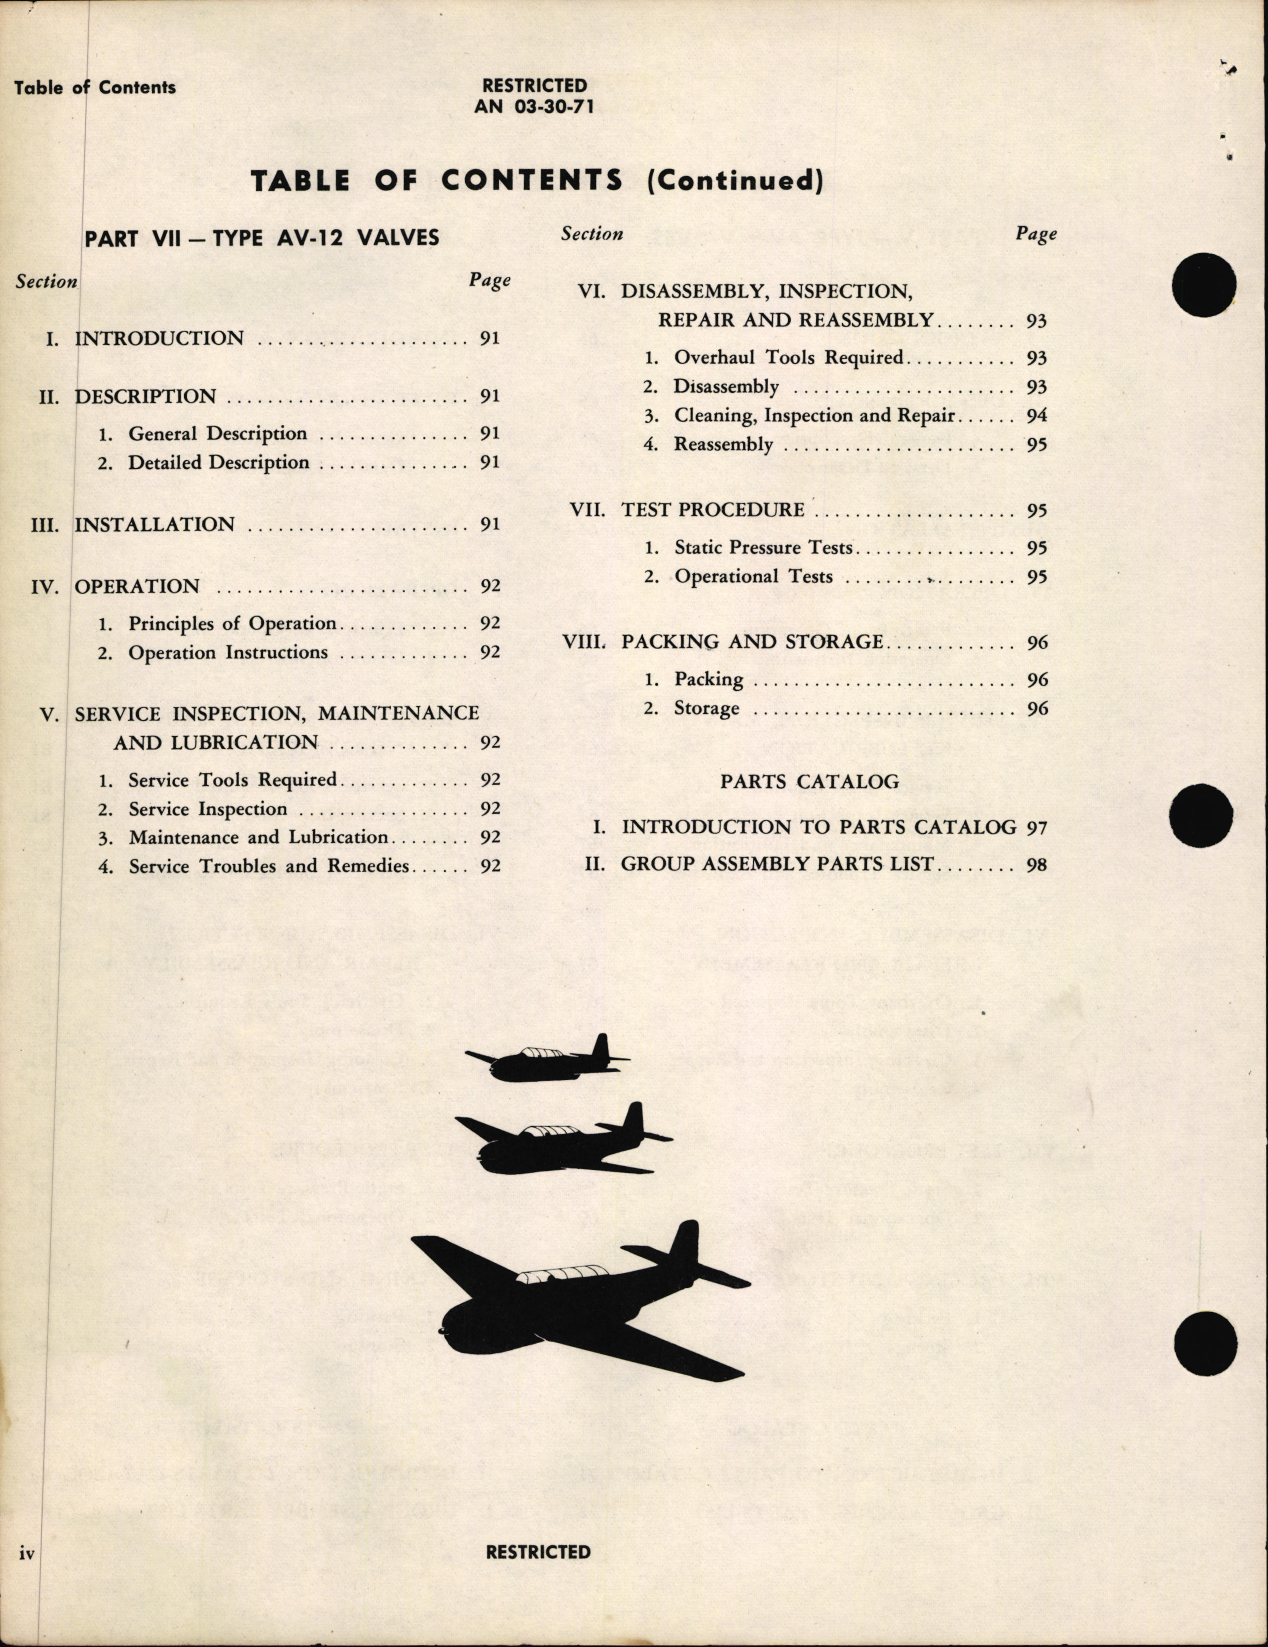 Sample page 6 from AirCorps Library document: Handbook of Instructions with Parts Catalog for Aircraft Valves